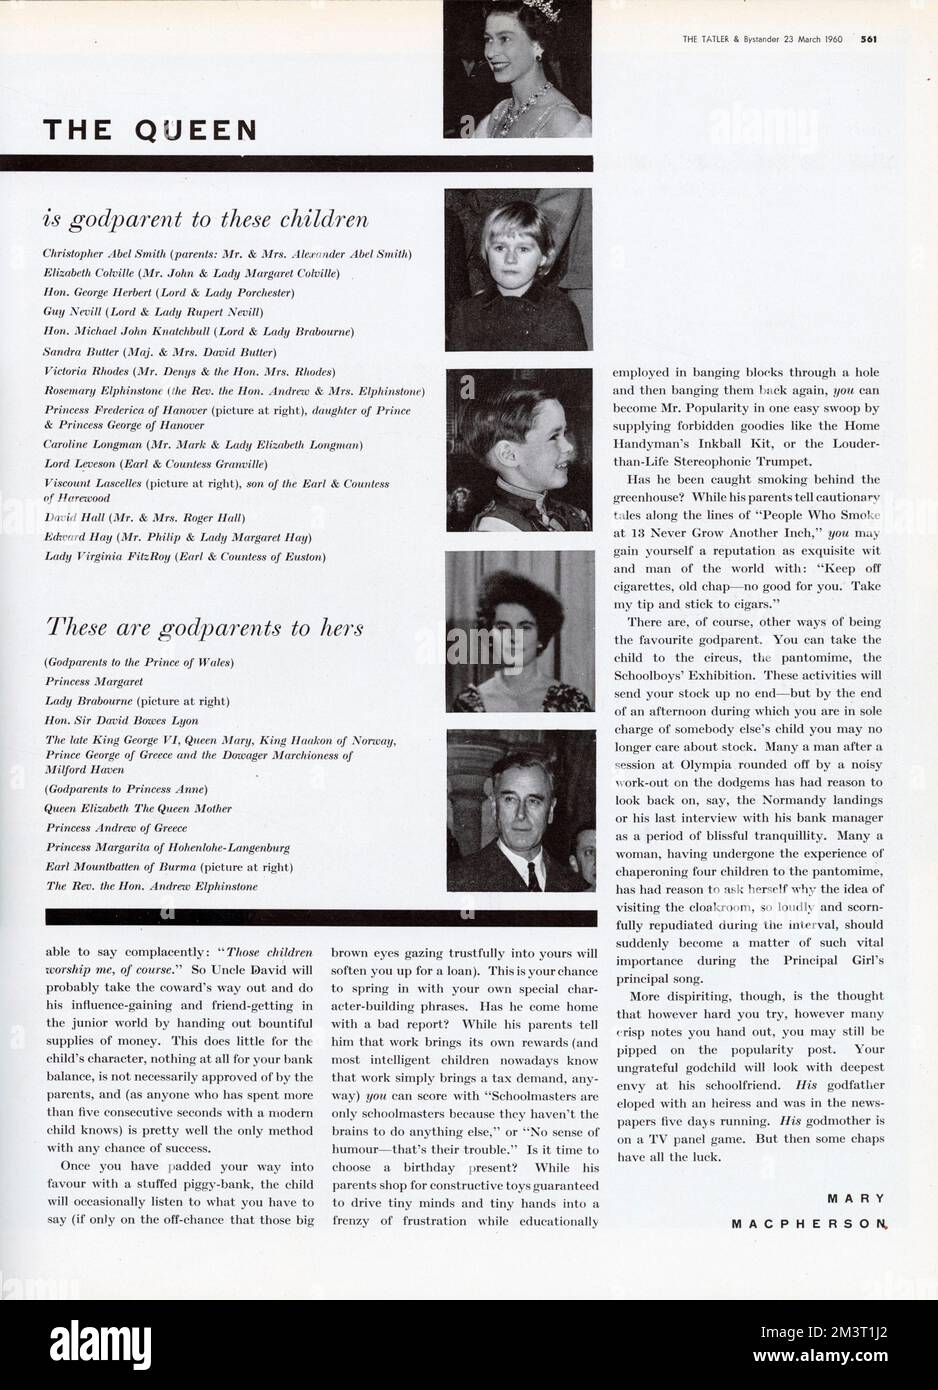 Page from The Tatler reporting on the godparents to the Queen's children, Prince Charles and Princess Anne, as well as the children to whom the Queen has been godmother too including Princess Frederica of Hanover and Viscount Lascelles. There are also photographs of Lady (Patricia) Brabourne, nee Mountbatten, godmother to Prince Charles, and Lord Mountbatten, godfather to Princess Anne. Stock Photo